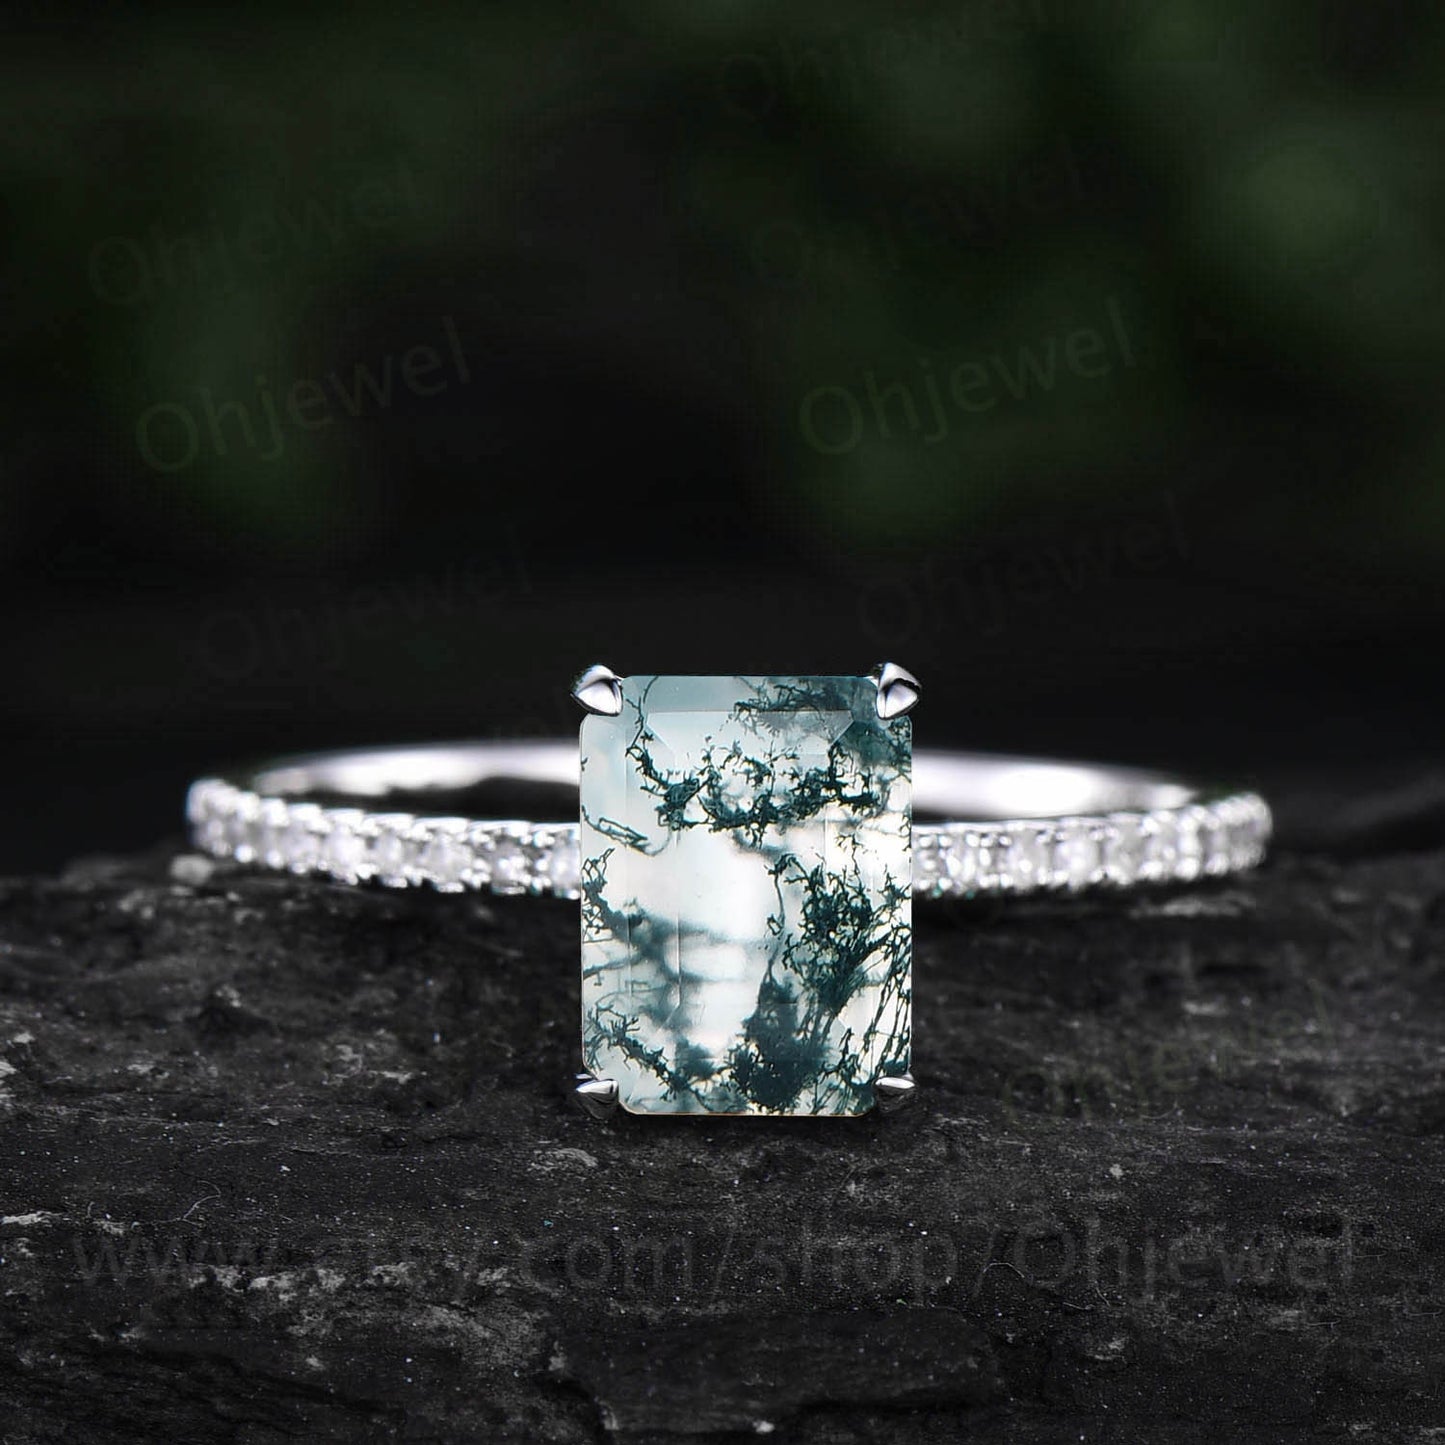 Green moss agate ring unique emerald cut moss agate engagement ring vintage eternity diamond ring for women solid gold sterling silver ring